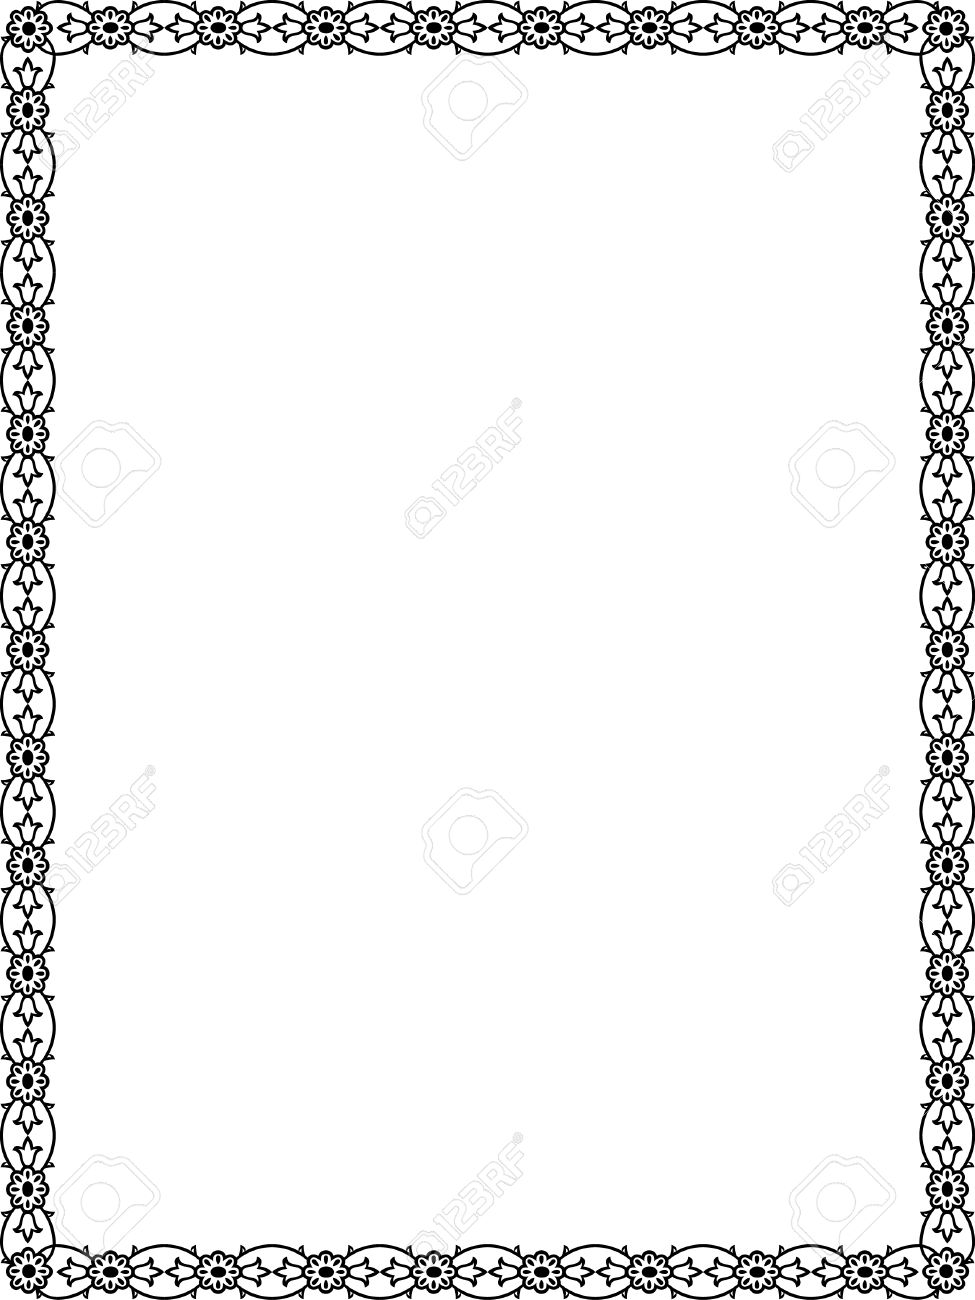 Flowers and plant leaves border frame, Black and White.